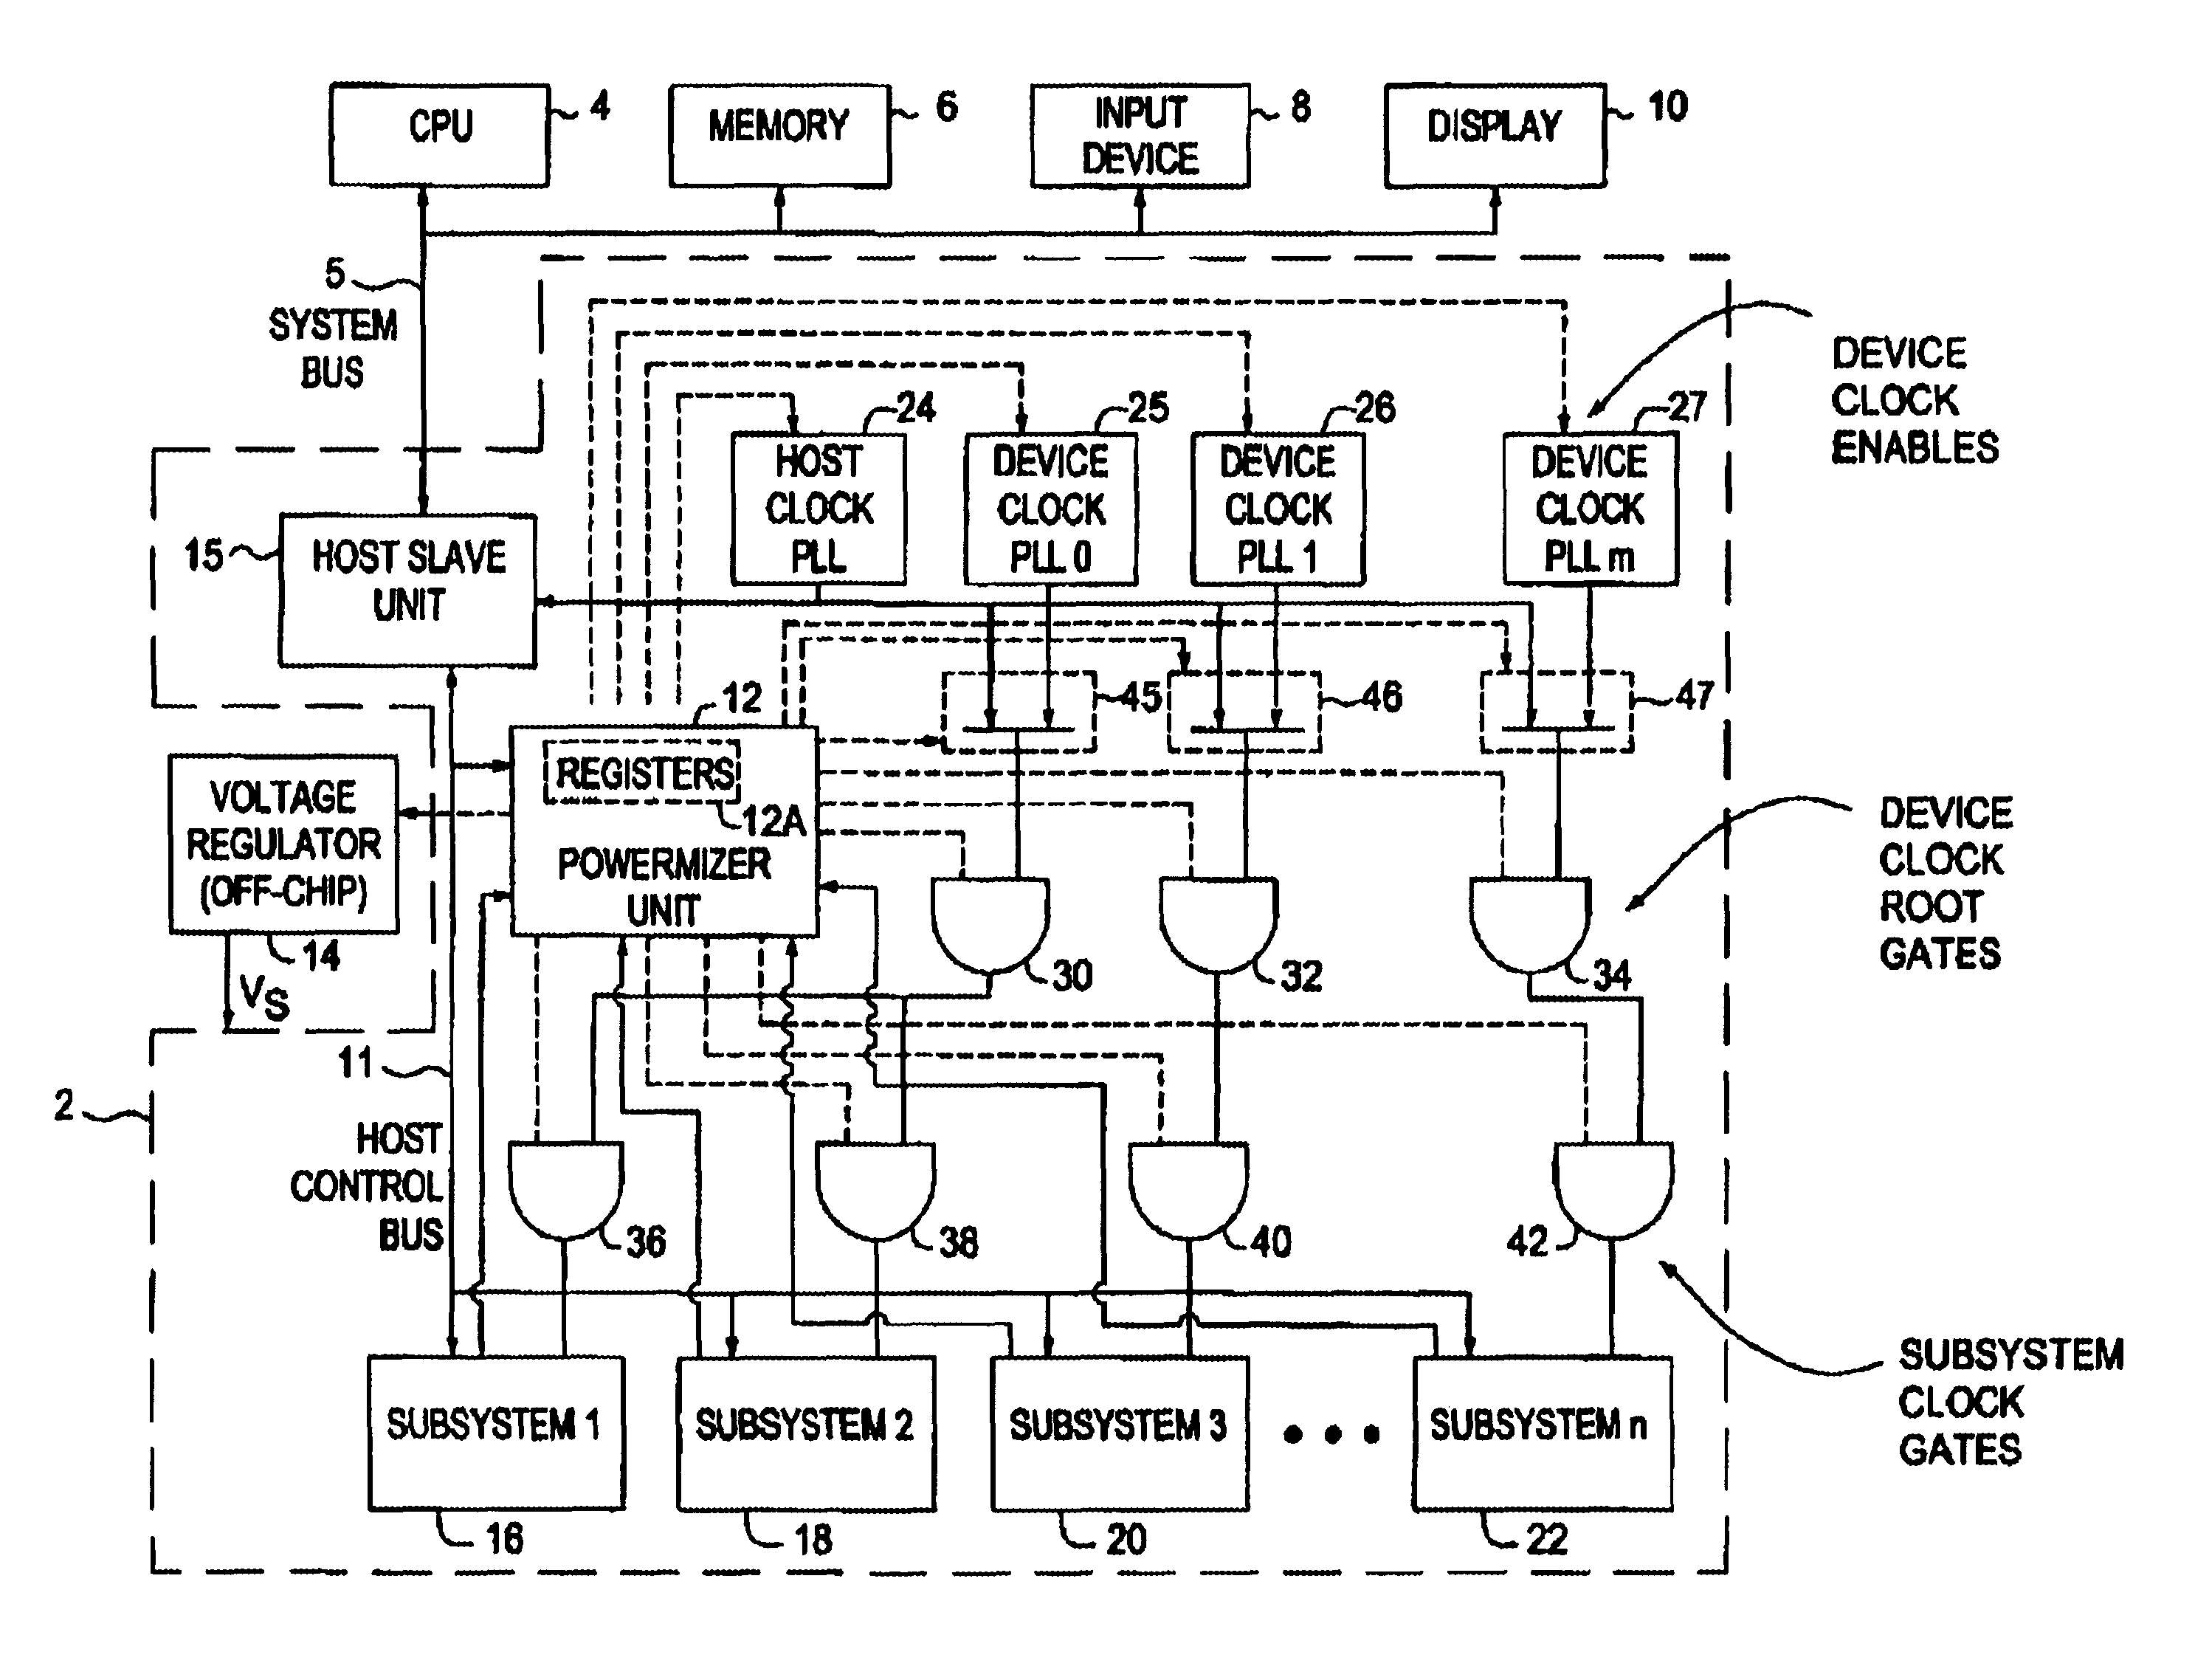 Method and apparatus for power management of graphics processors and subsystems that allow the subsystems to respond to accesses when subsystems are idle